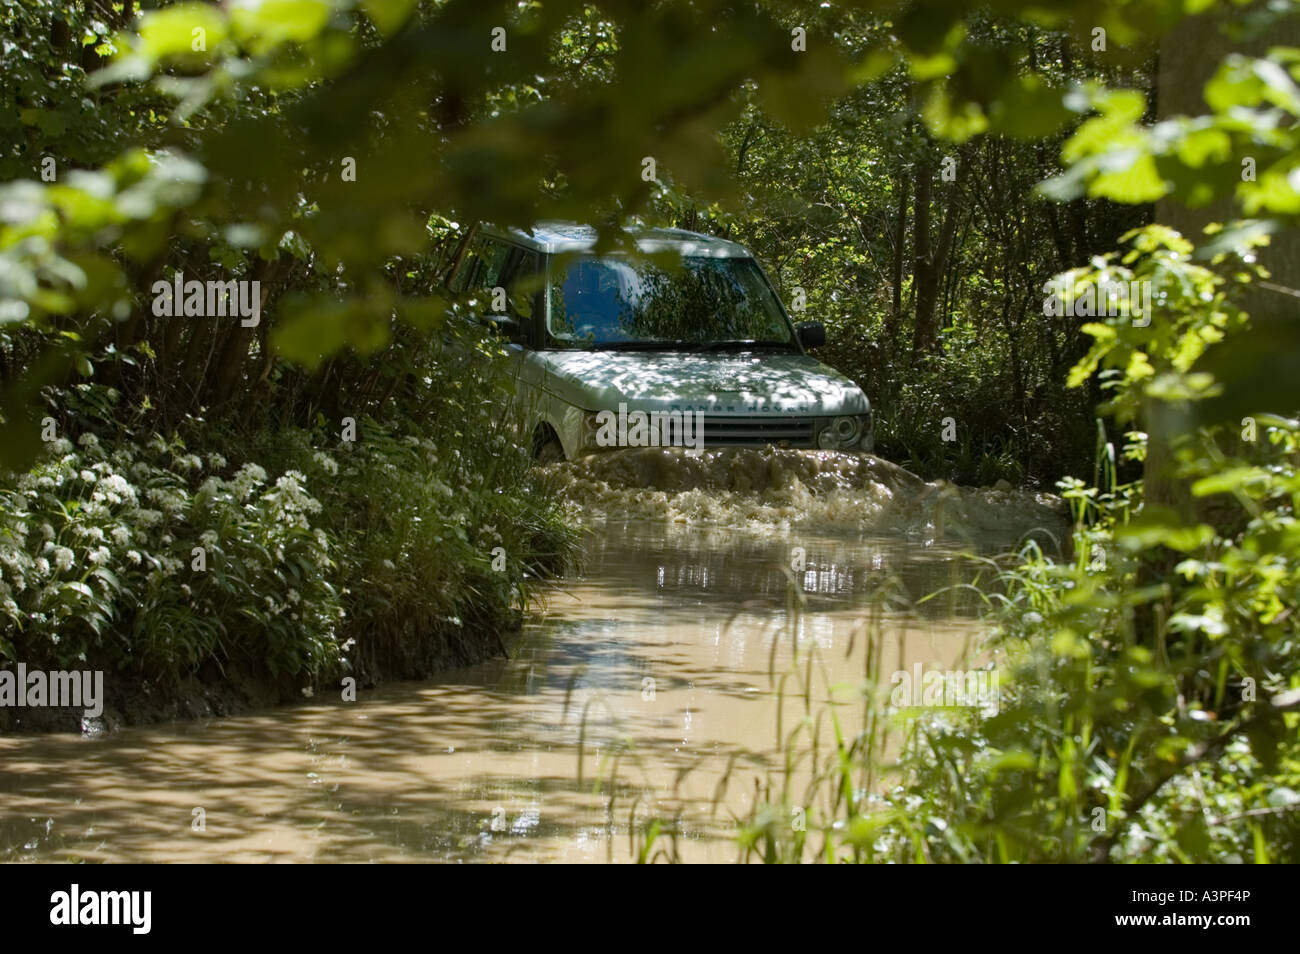 Land rover's flagship model the Range rover series 3 wades into deep water Stock Photo